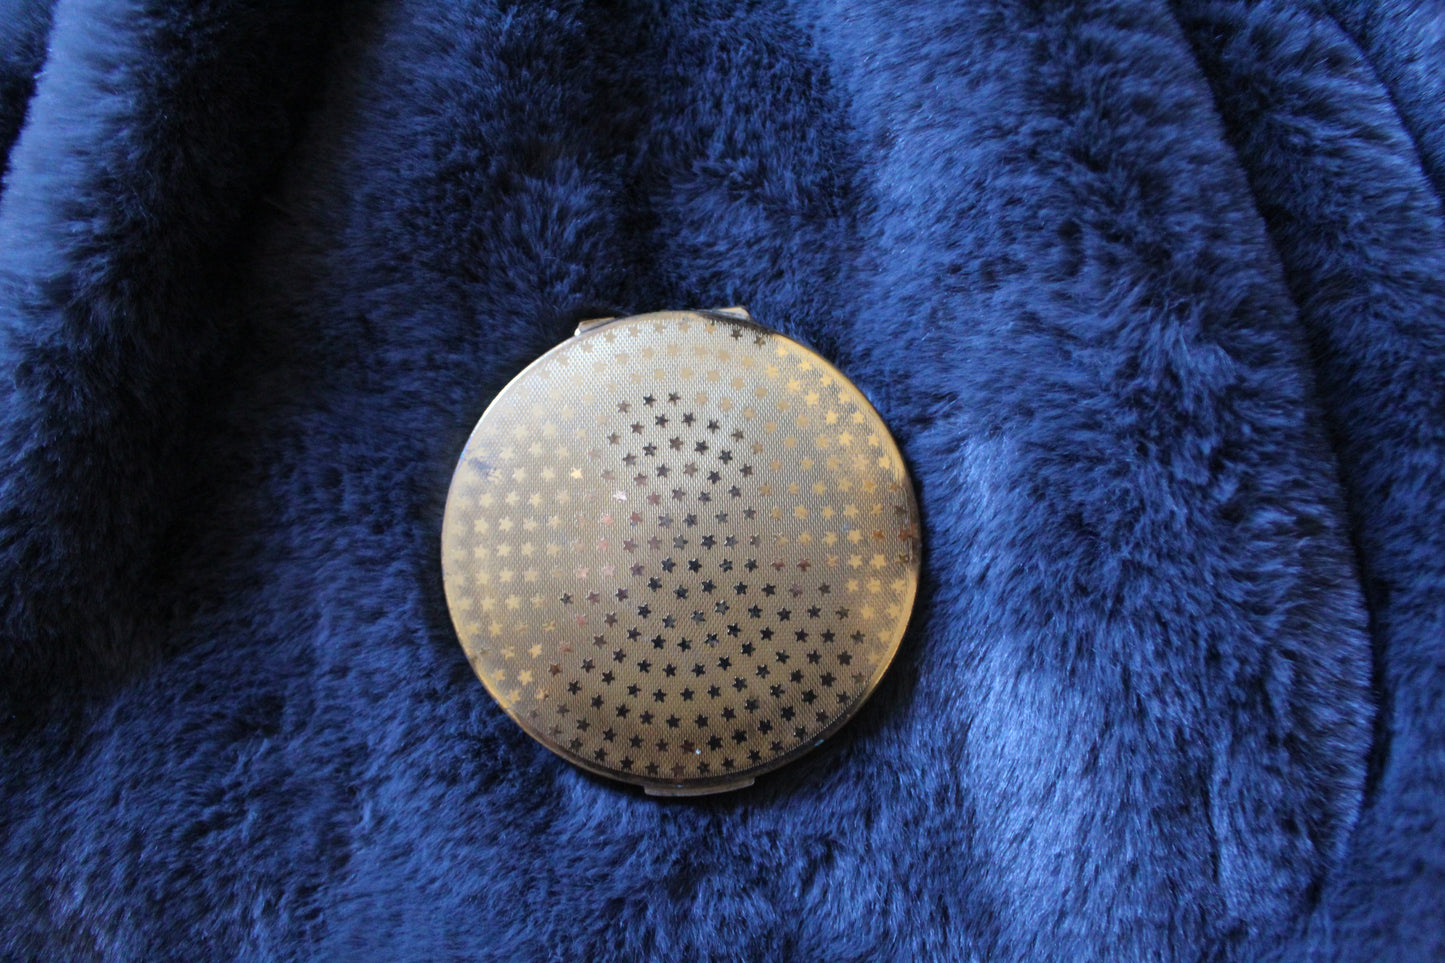 Vintage gold colour compact with star design